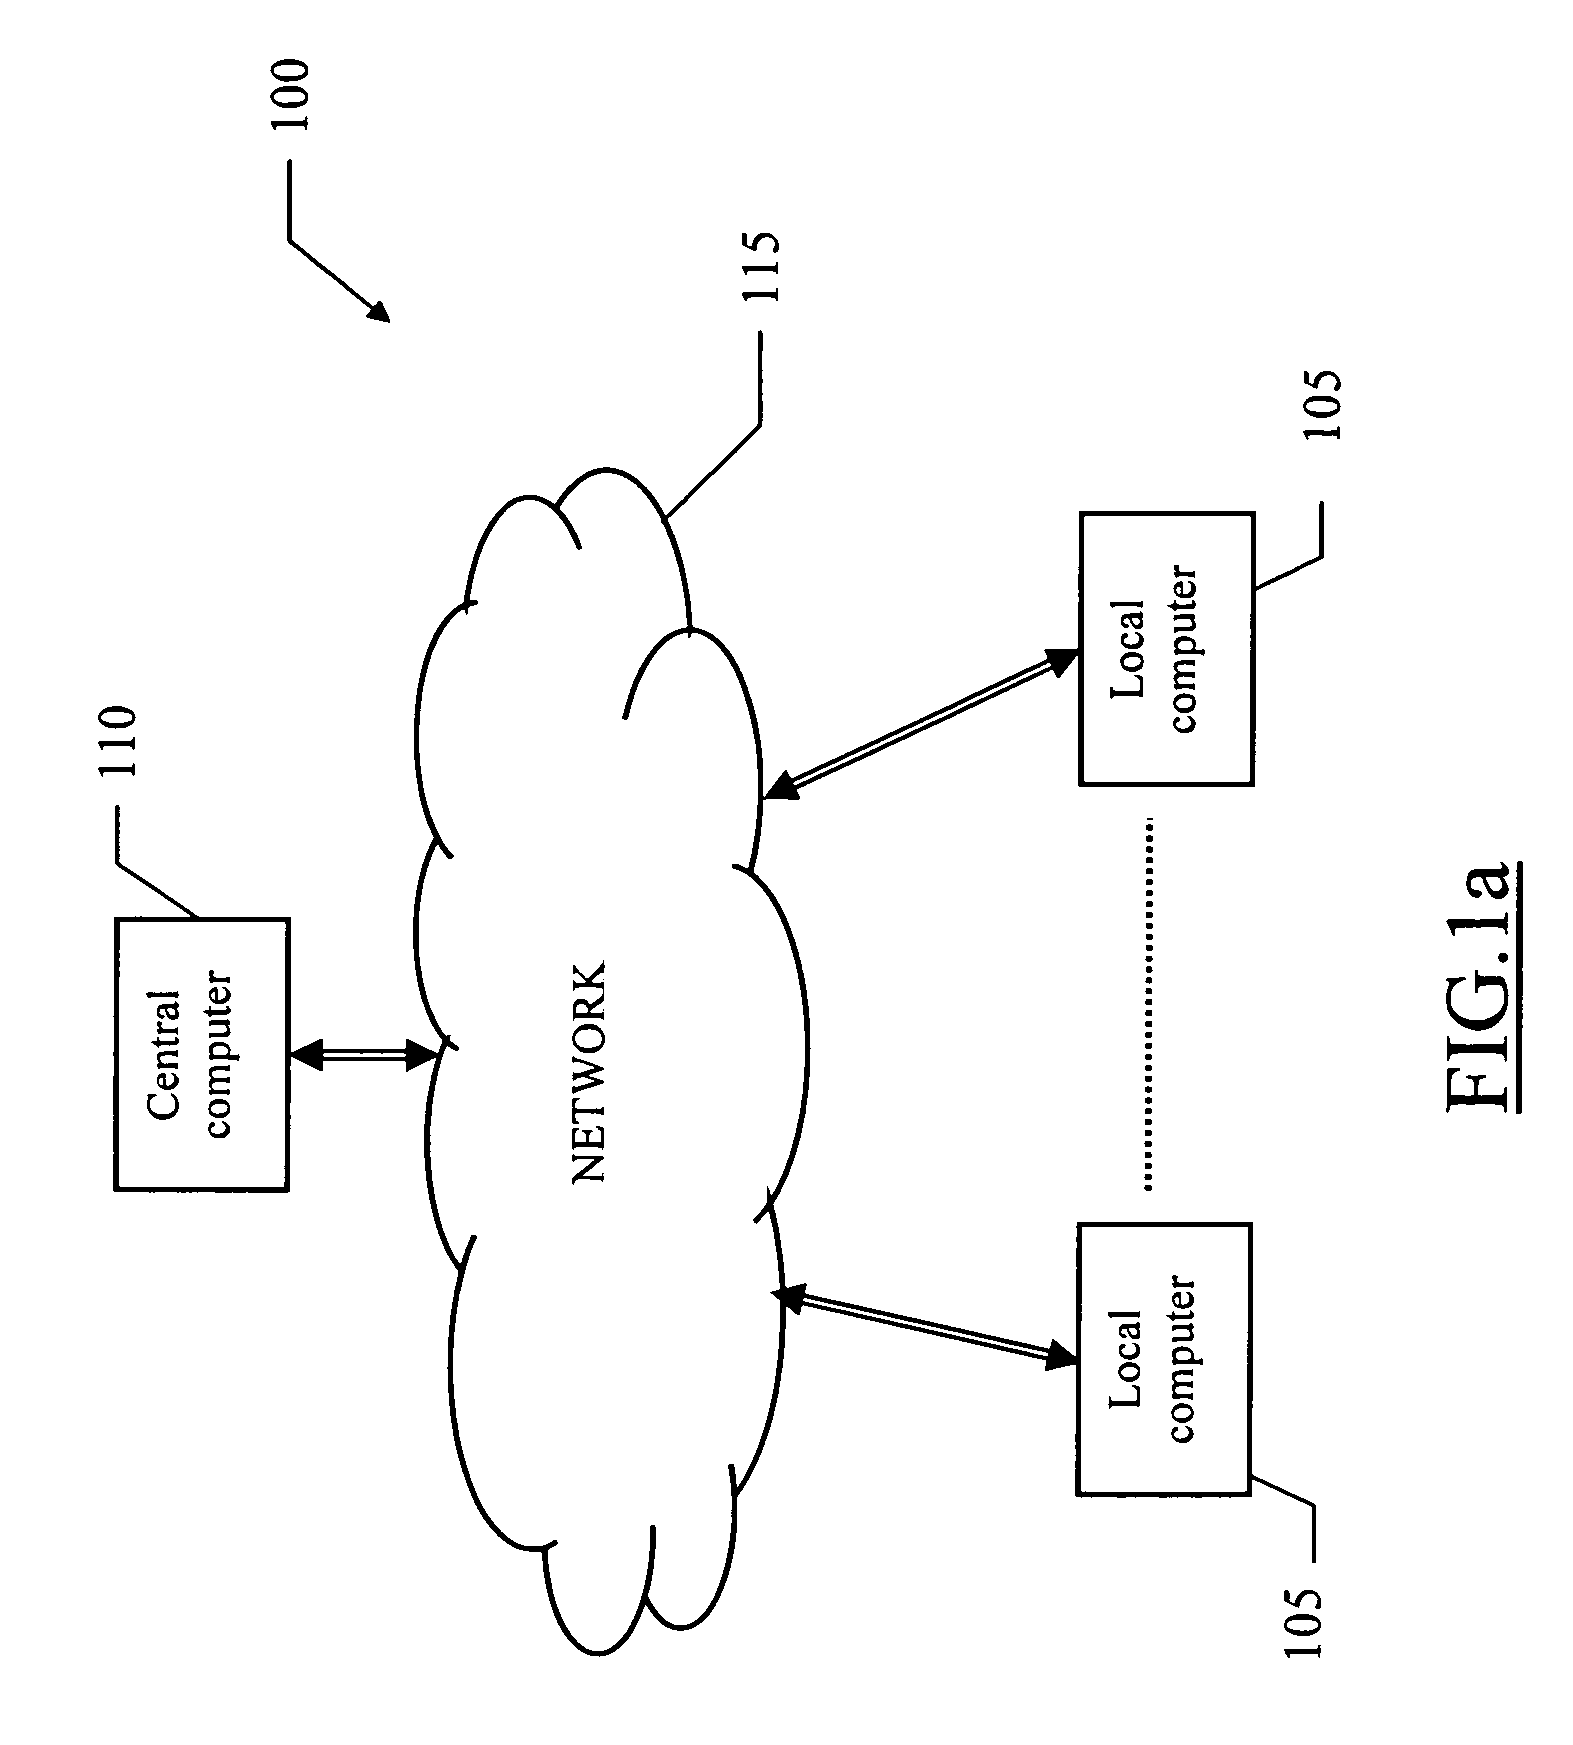 Method for monitoring data processing system availability